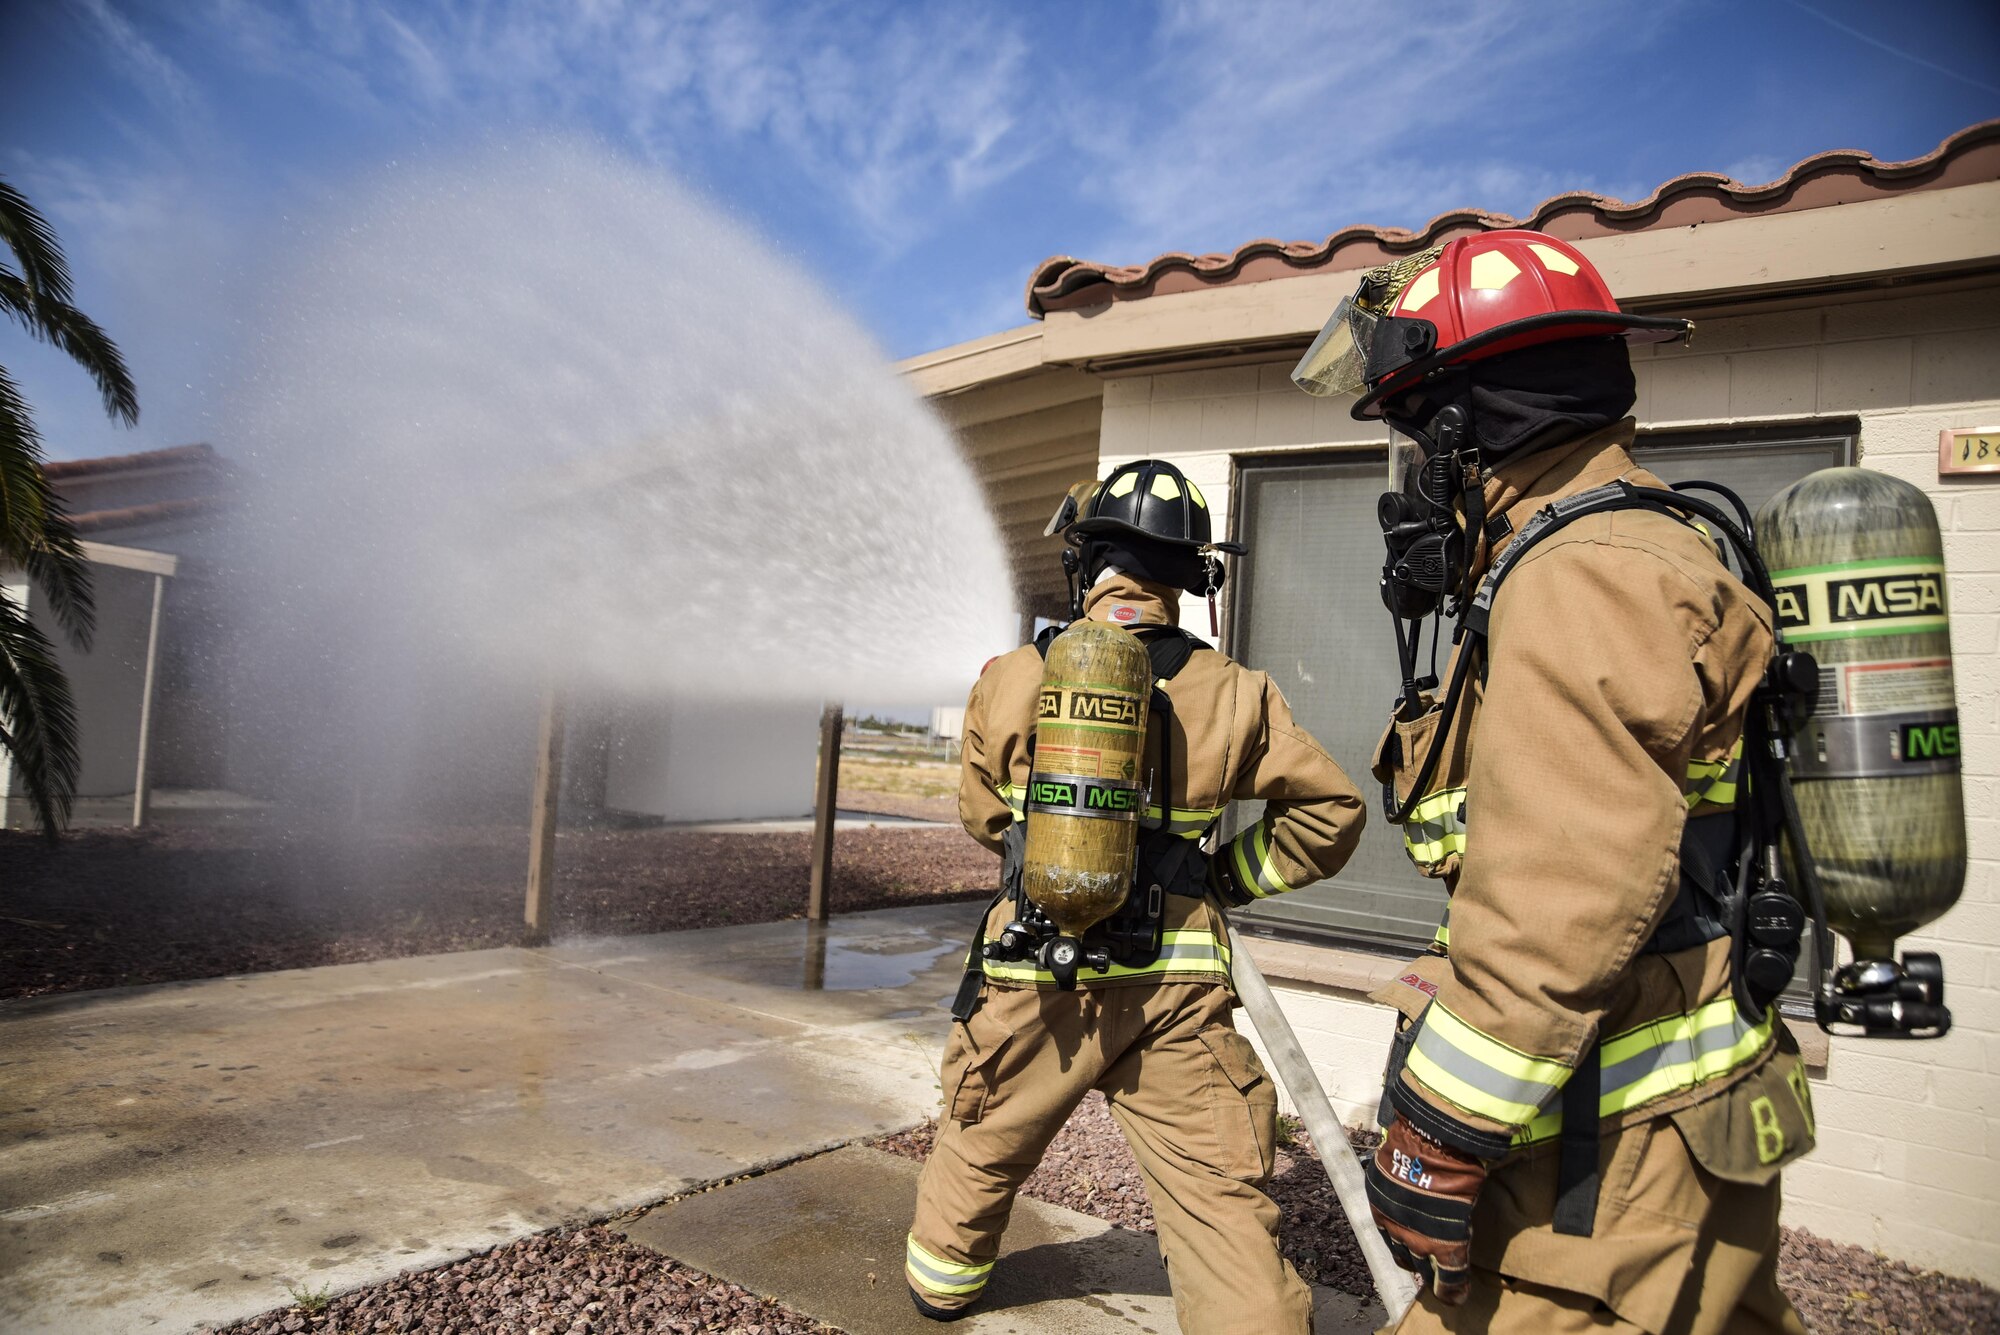 Airman 1st Class Brian Velten, 99th Civil Engineer Squadron firefighter, and Staff Sgt. Blaine Erway, 99th CES firefighter crew chief, use a firehose on a simulated house fire during Red Flag 17-3 at Nellis Air Force Base, Nev., July 18, 2017. Firefighters train for various situations to maintain their emergency response readiness. (U.S. Air Force photo by Airman 1st Class Andrew D. Sarver/Released)